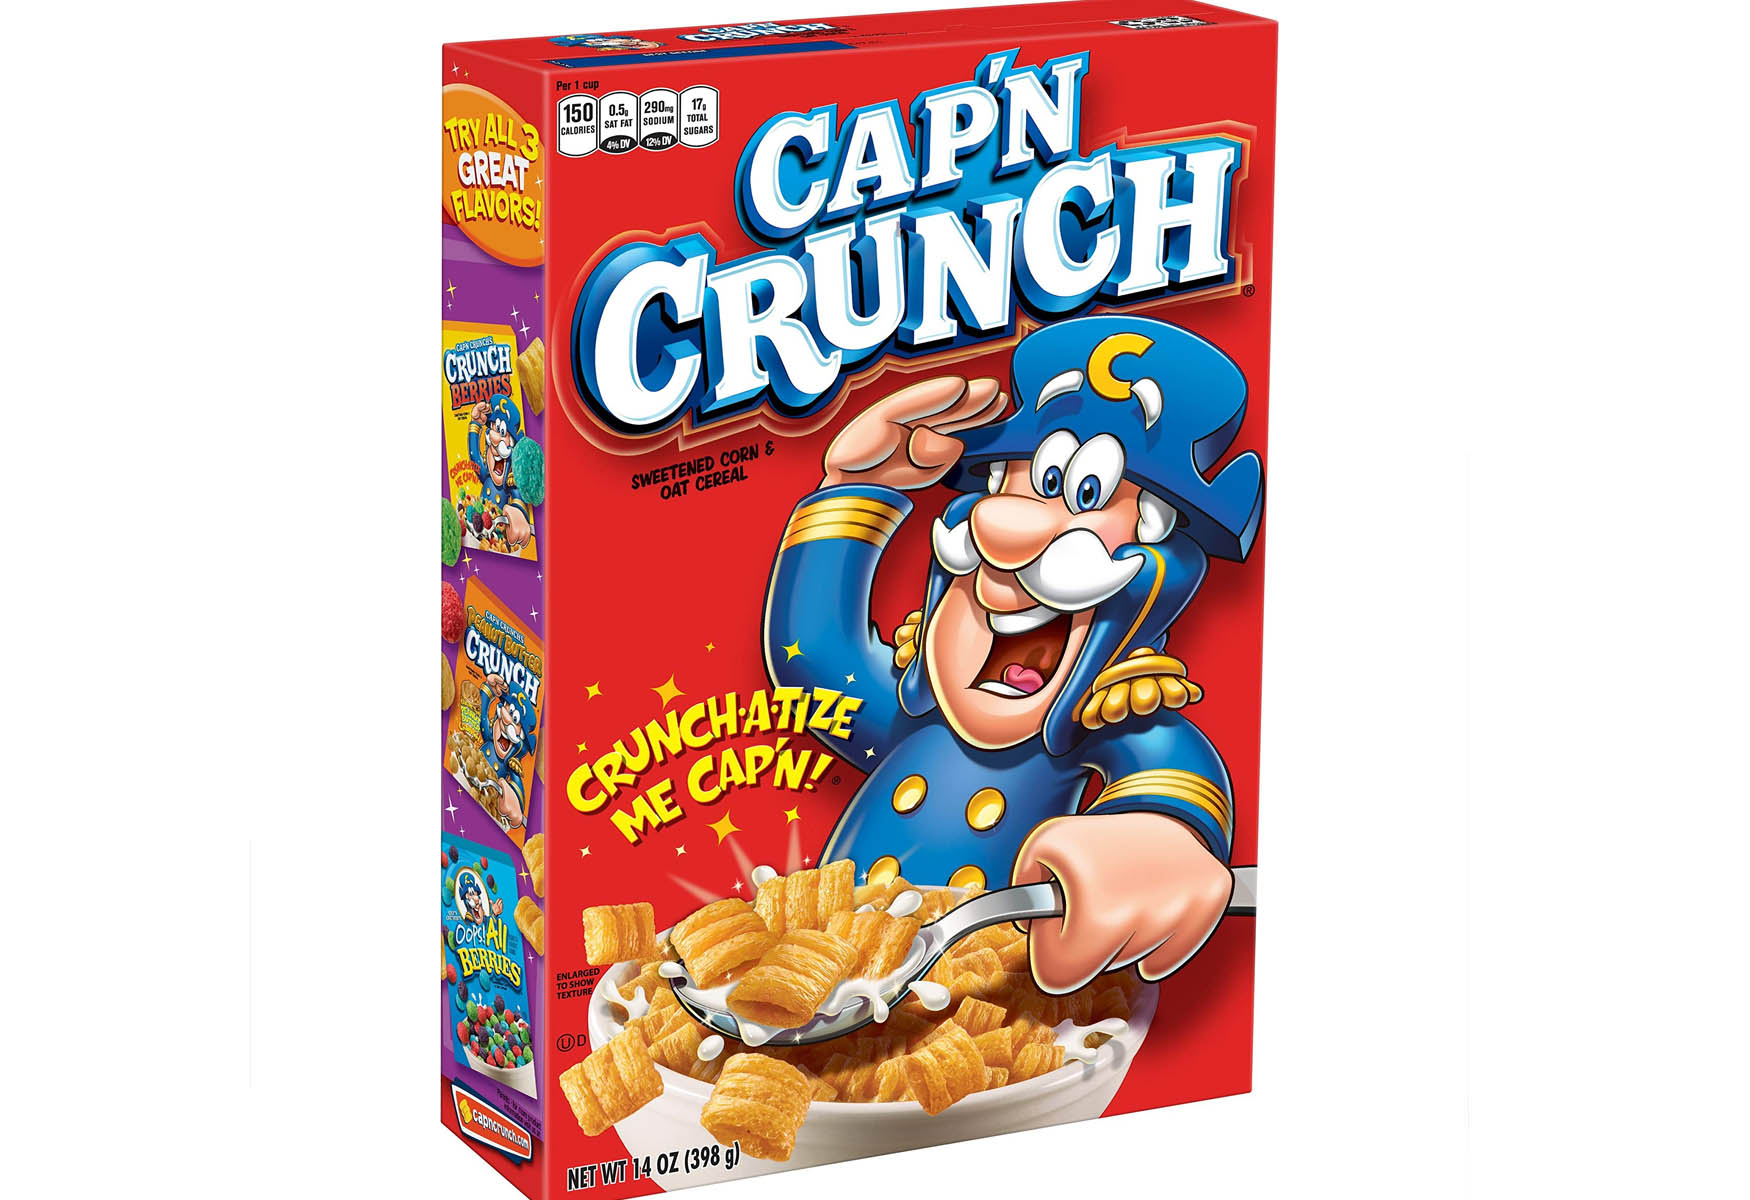 15-capn-crunch-nutrition-facts